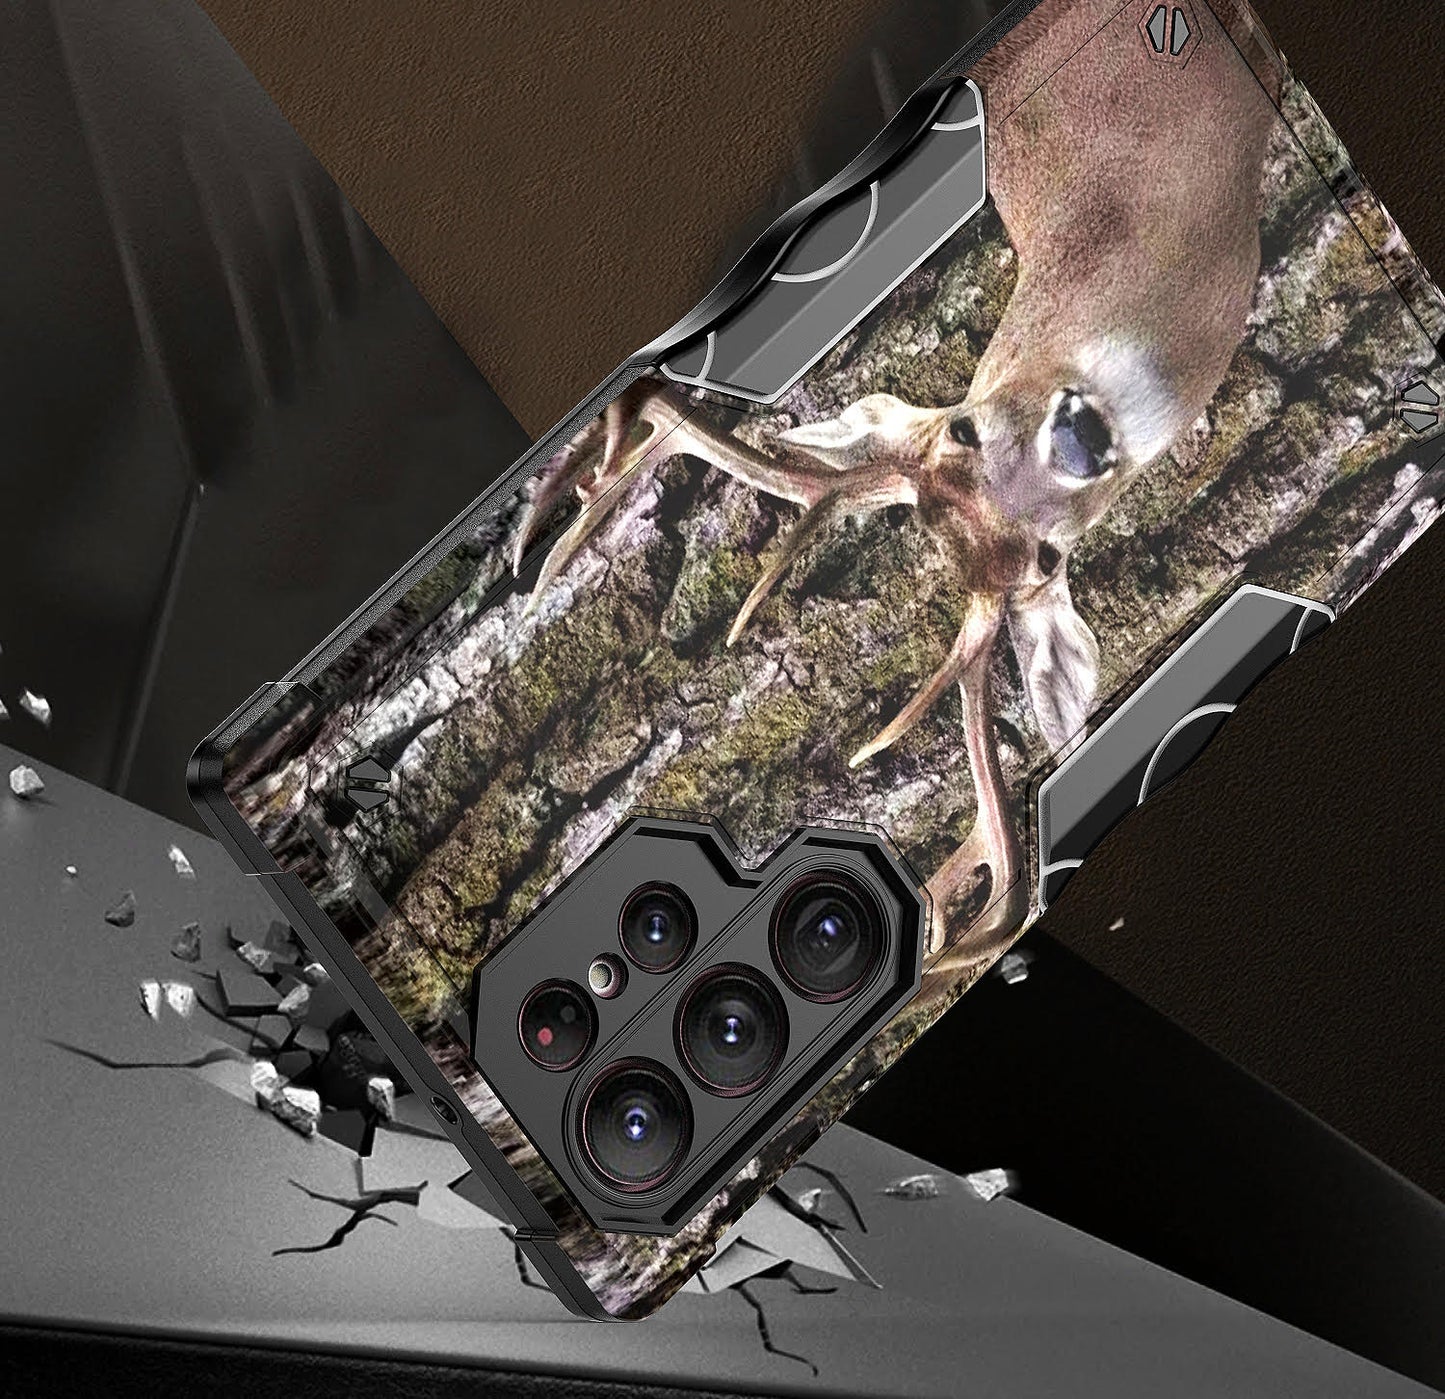 Case For Samsung Galaxy S22 ULTRA - Hybrid Grip Design Shockproof Phone Cover - Whitetail Buck